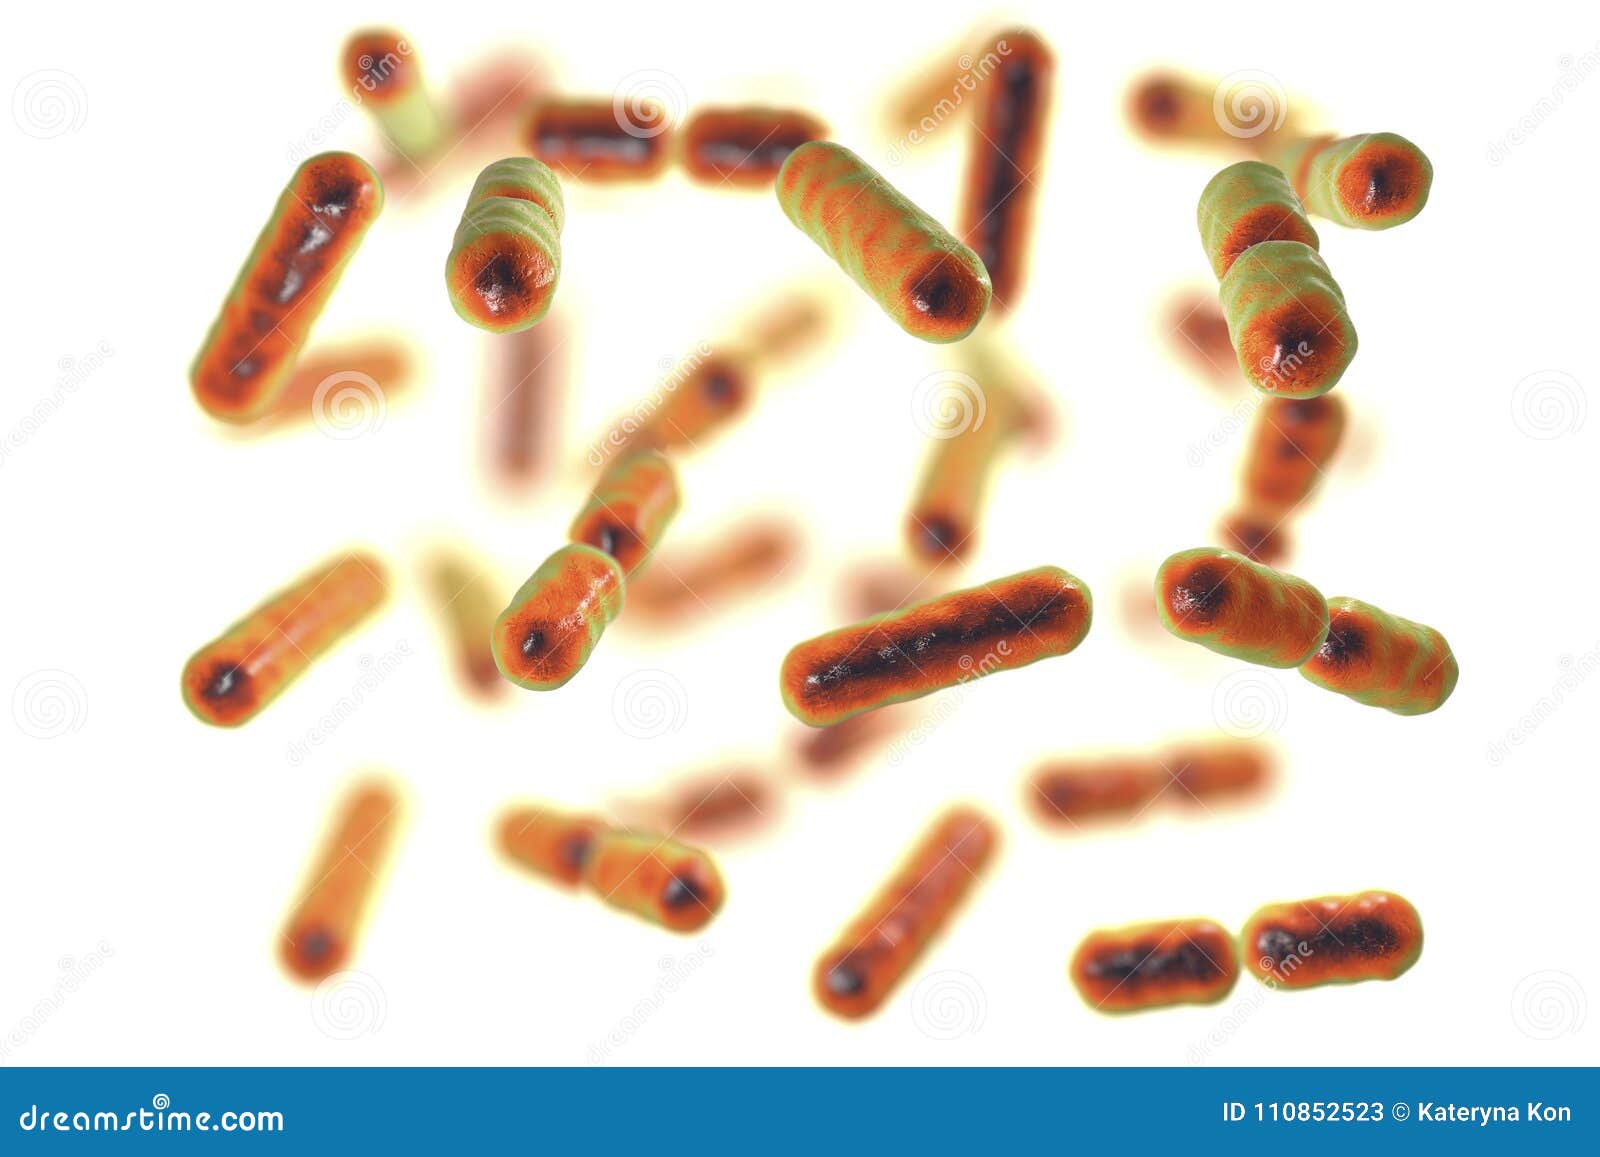 bacteria bacteroides fragilis, the major component of normal microbiome of human intestine